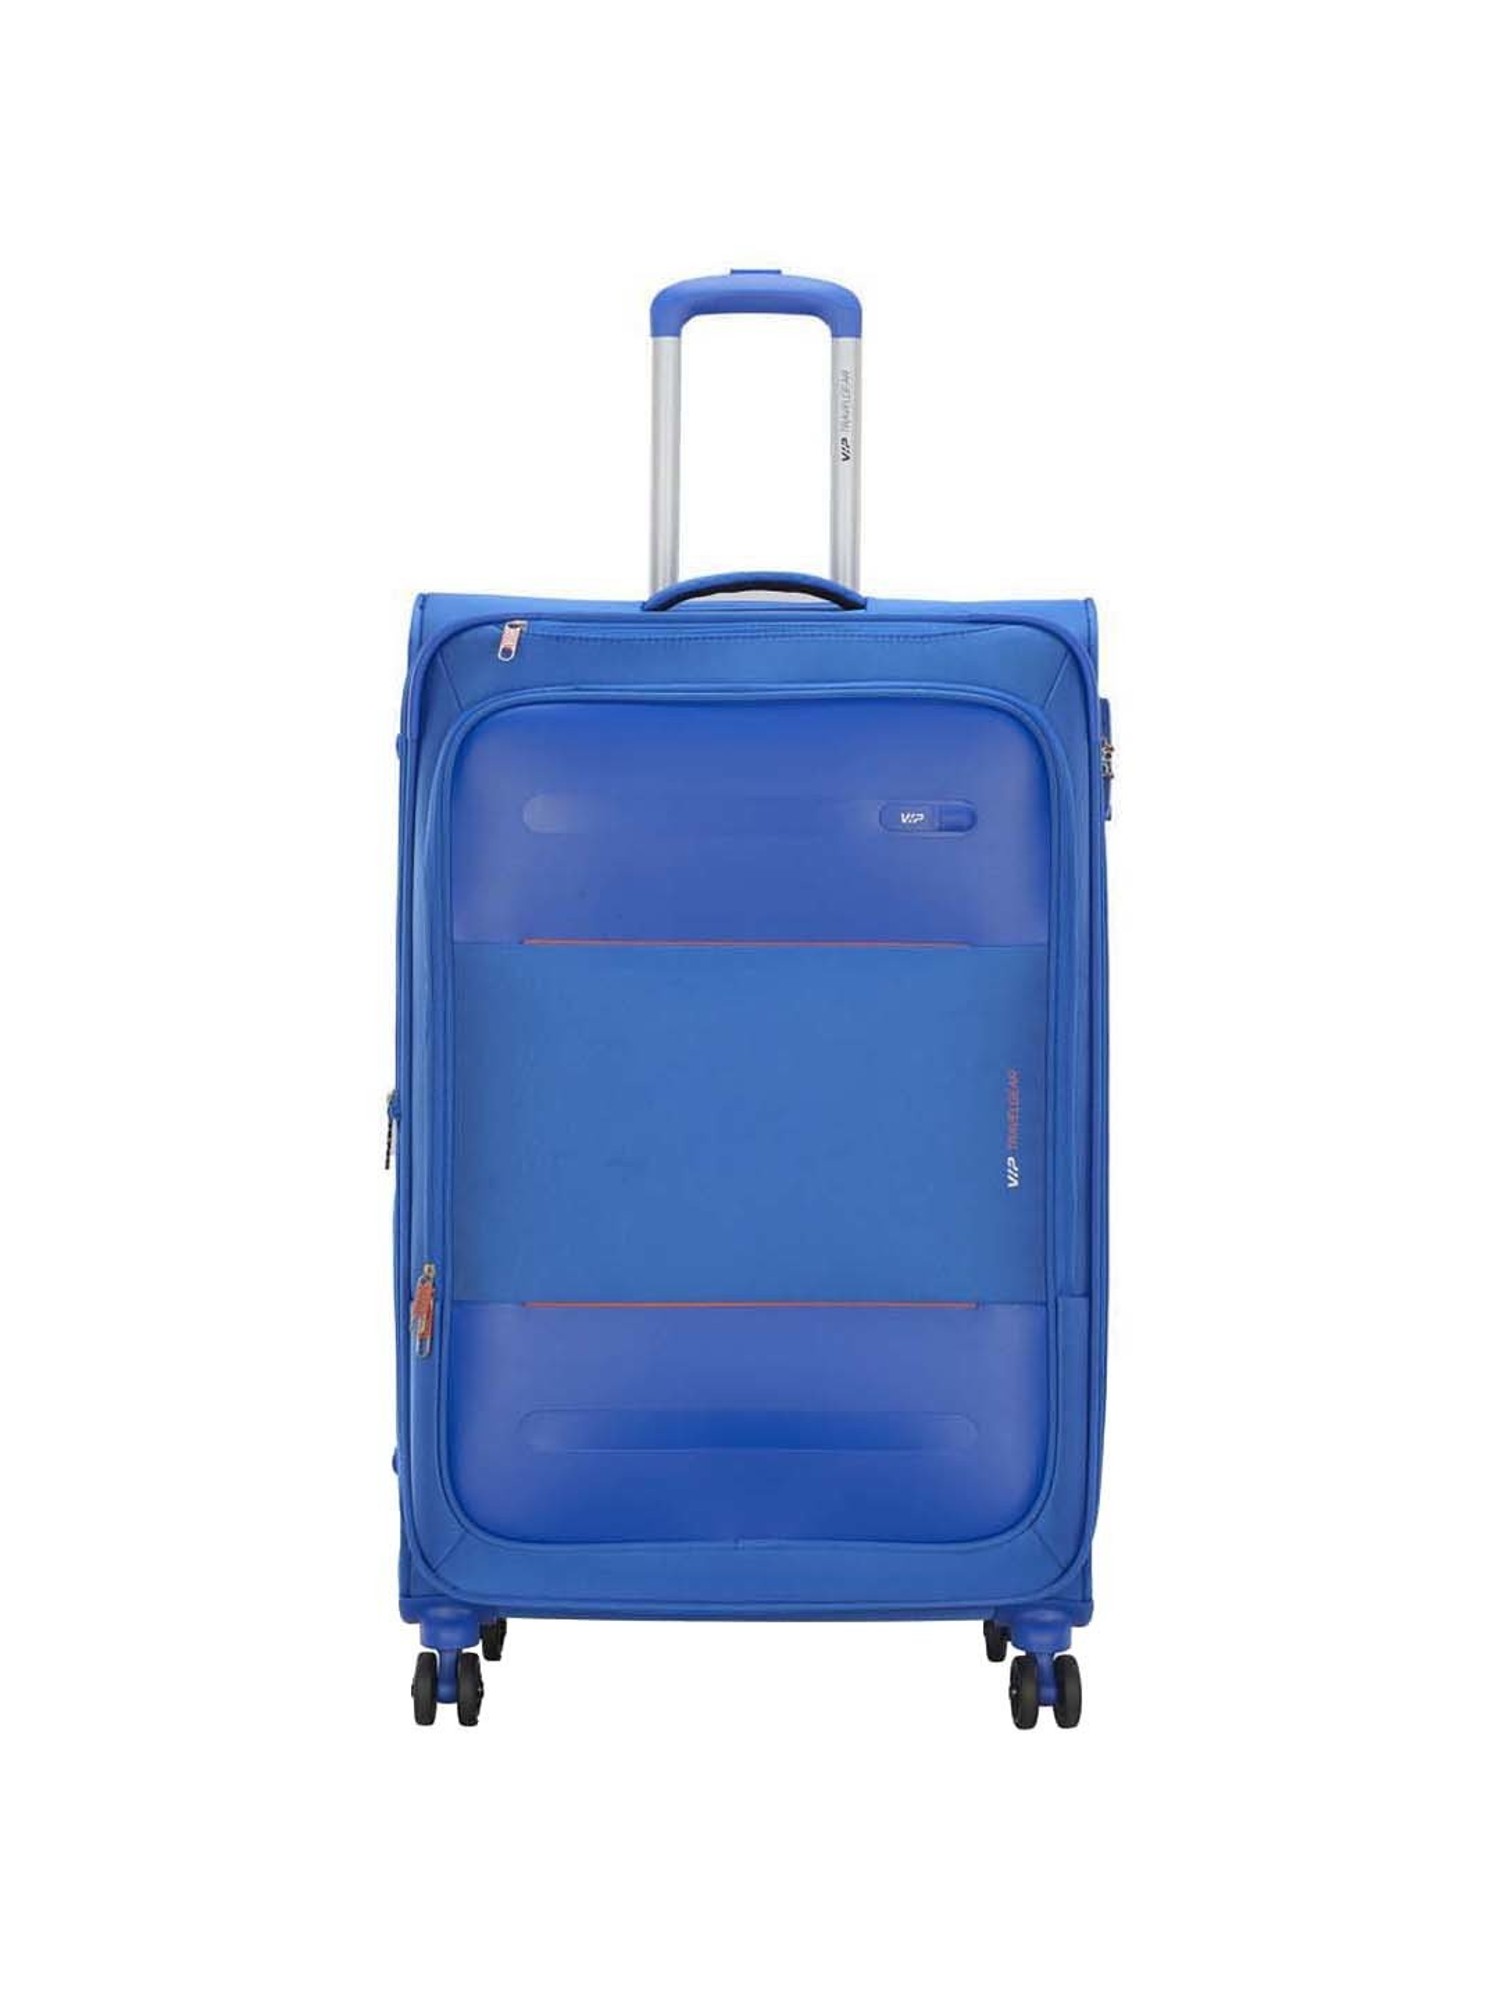 VIP Aristocrat Fort Set of 3 Trolley Bags| Soft Body Luggage Bags with  Number Lock and 4 Wheels| Anti Theft Zip and 360 Rotation|  Cabin+Medium+Large (Blue) : Amazon.in: Fashion